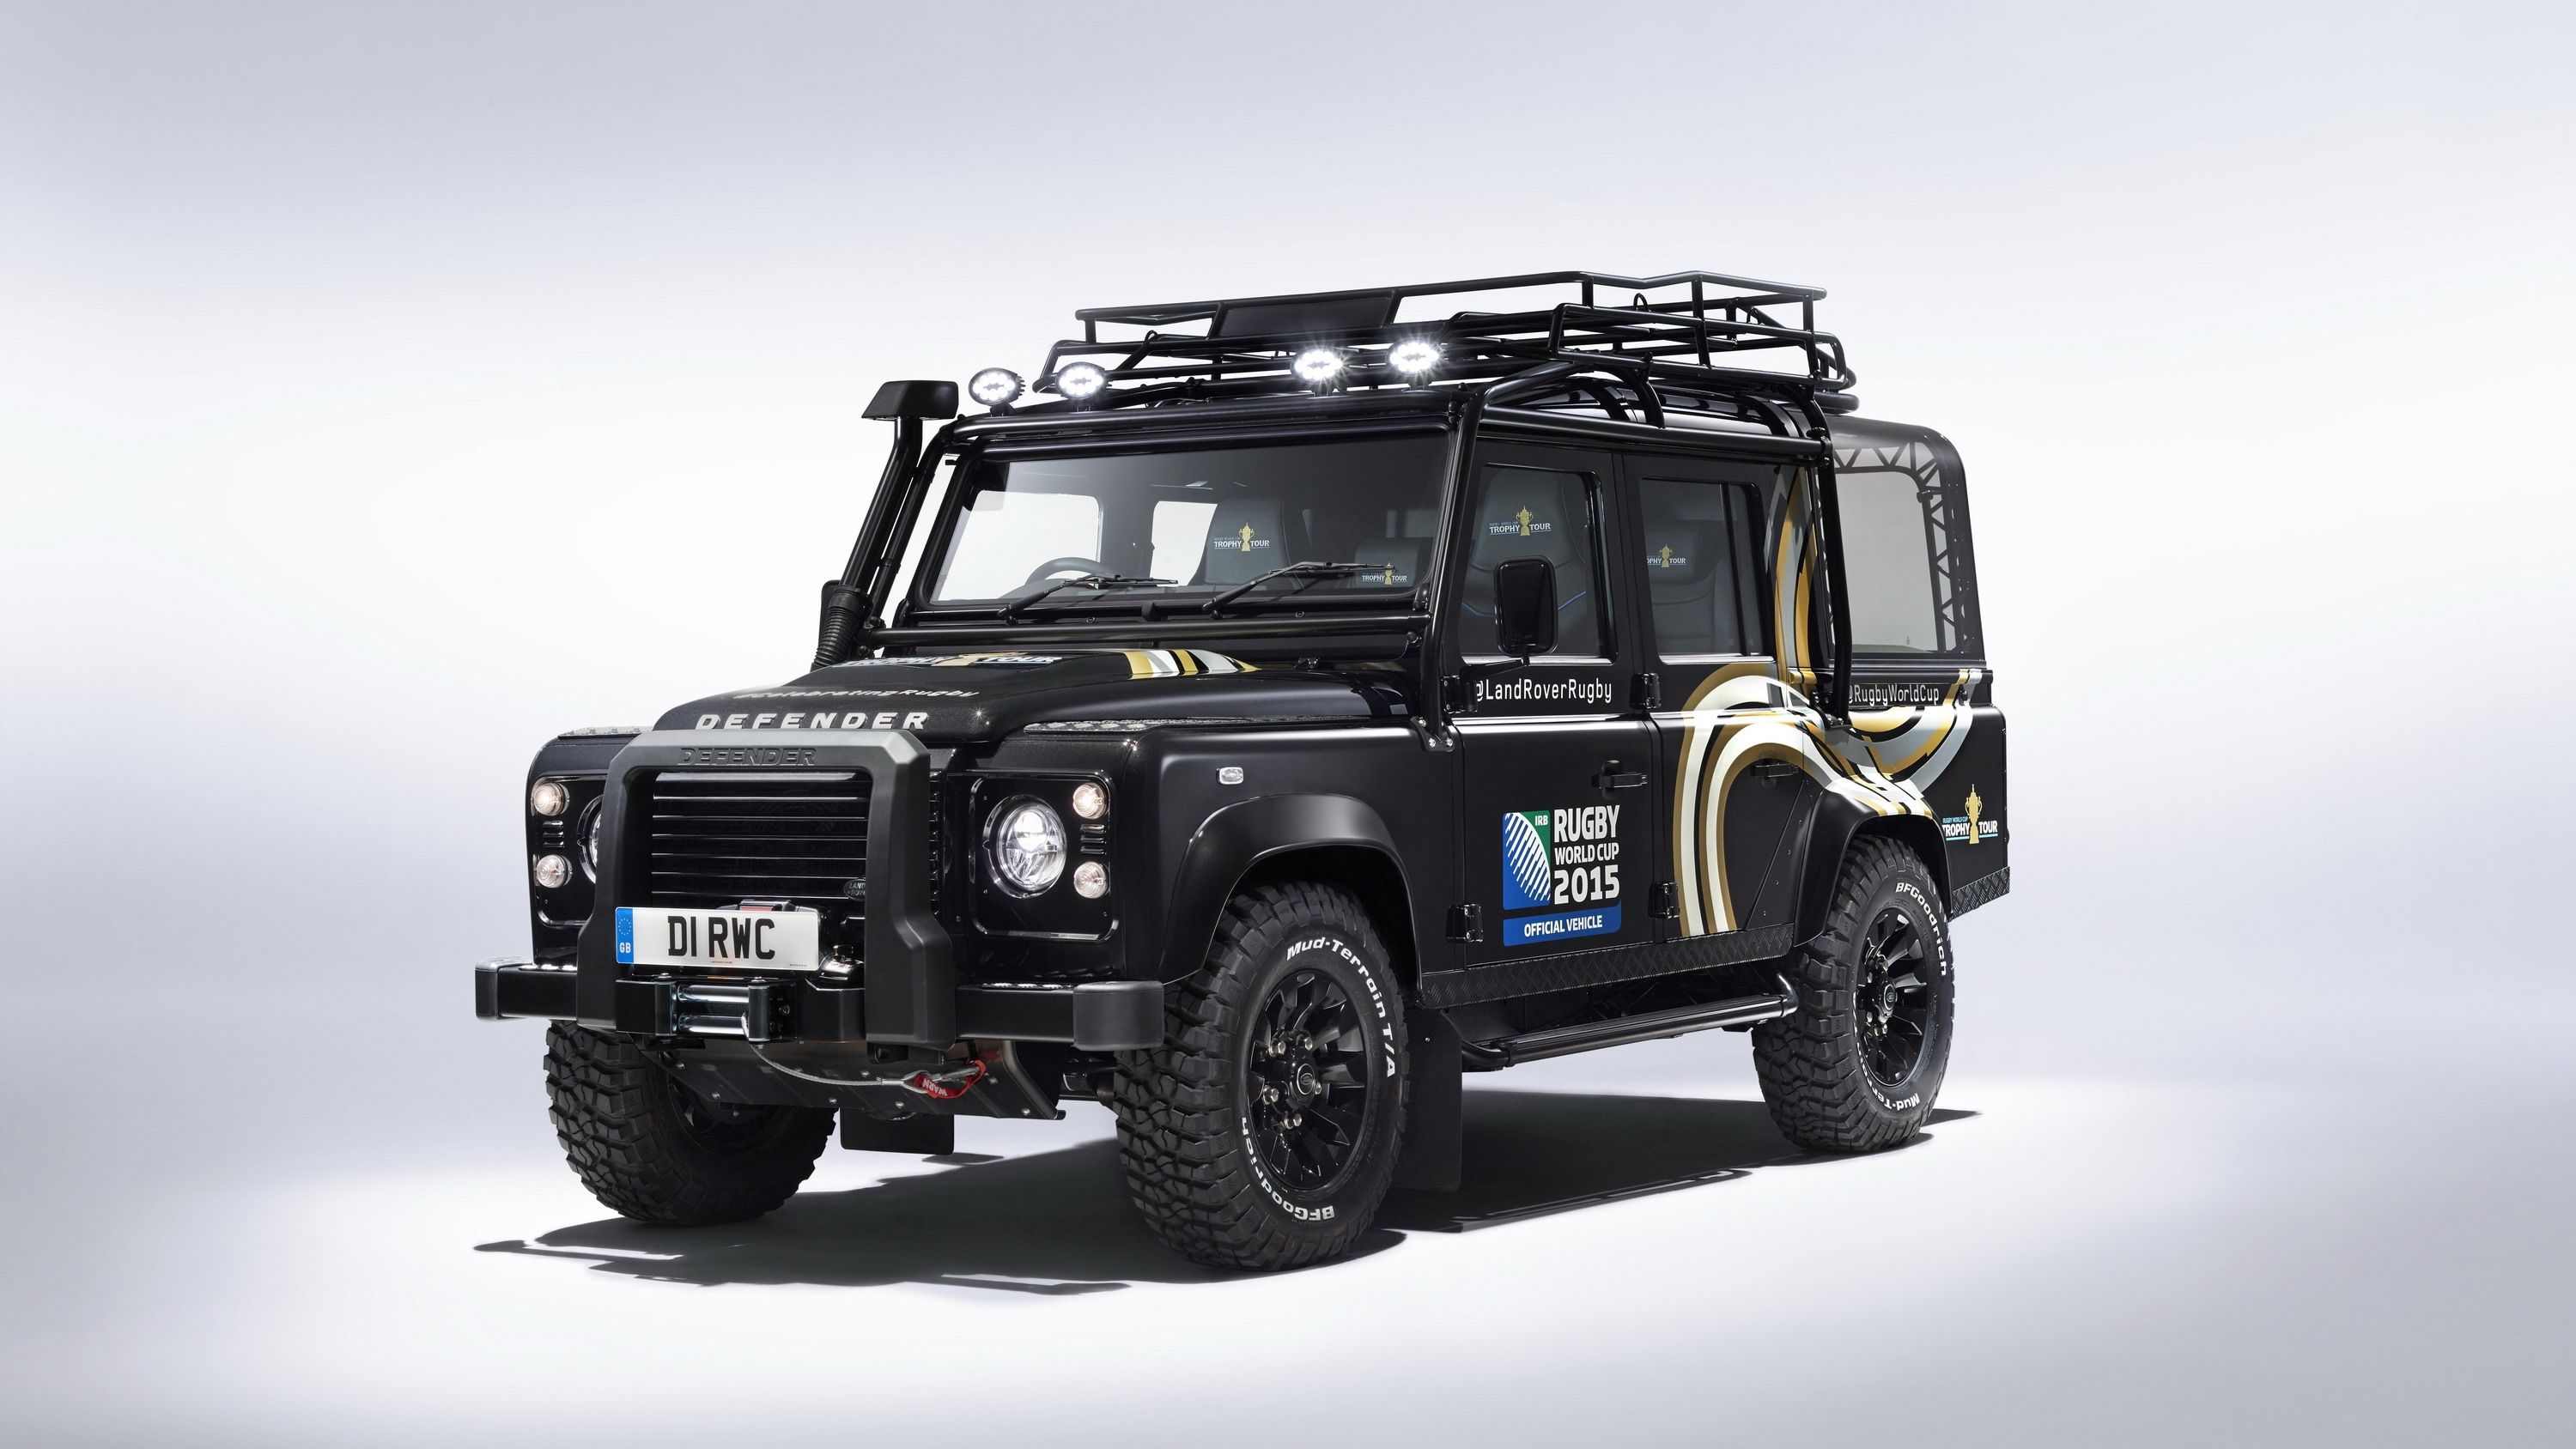 2015 Land Rover Defender Rugby World Cup Edition 